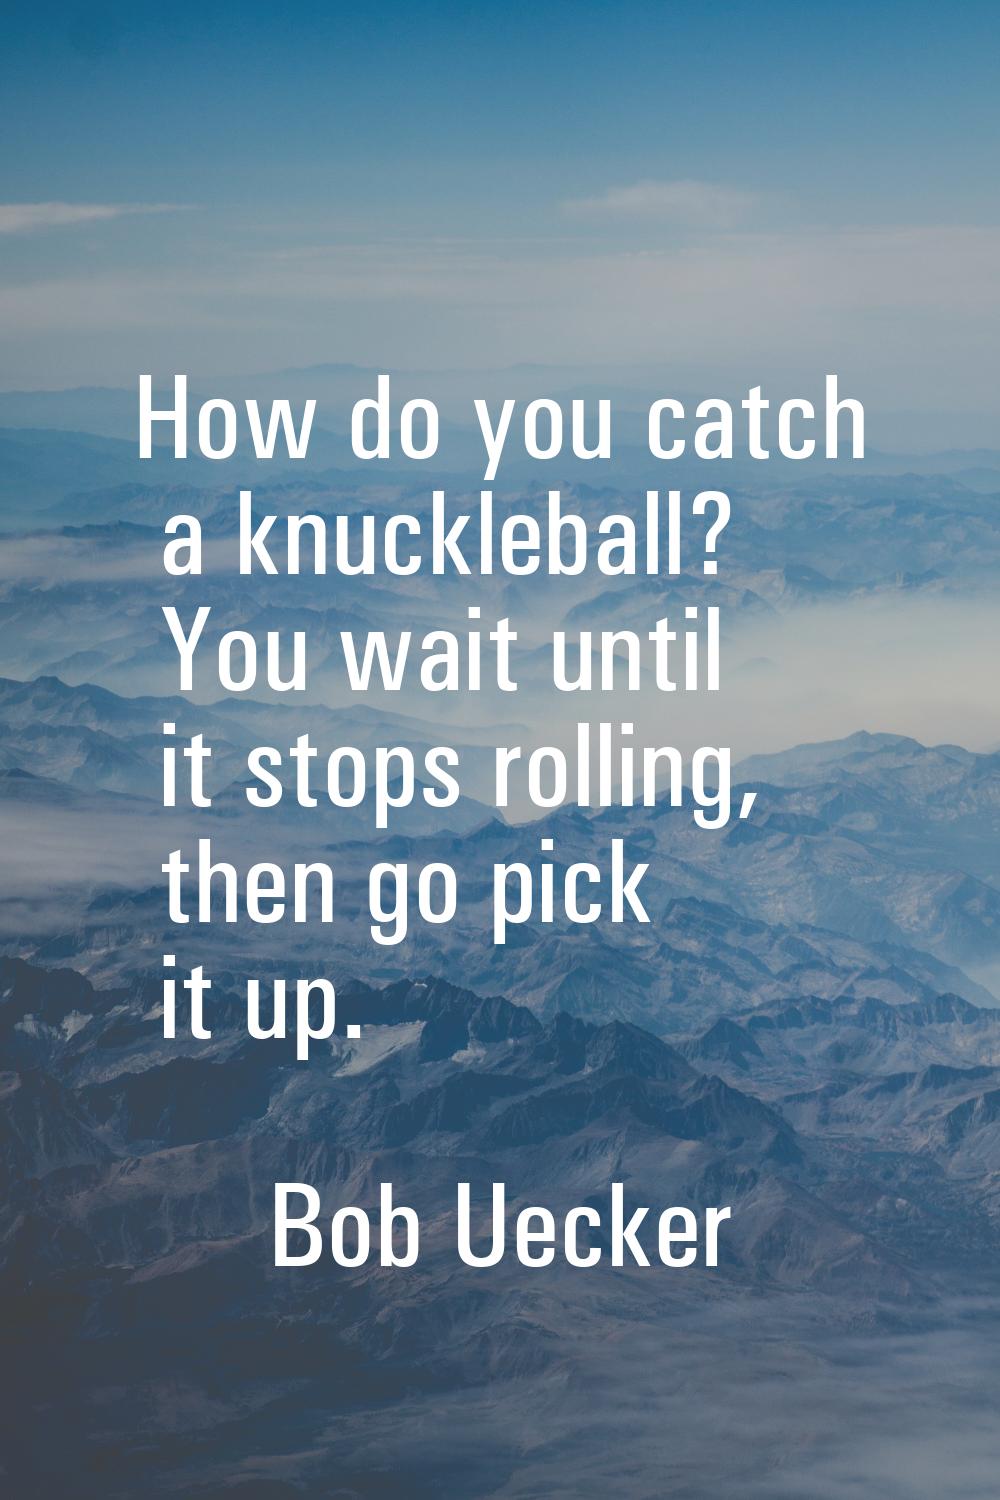 How do you catch a knuckleball? You wait until it stops rolling, then go pick it up.